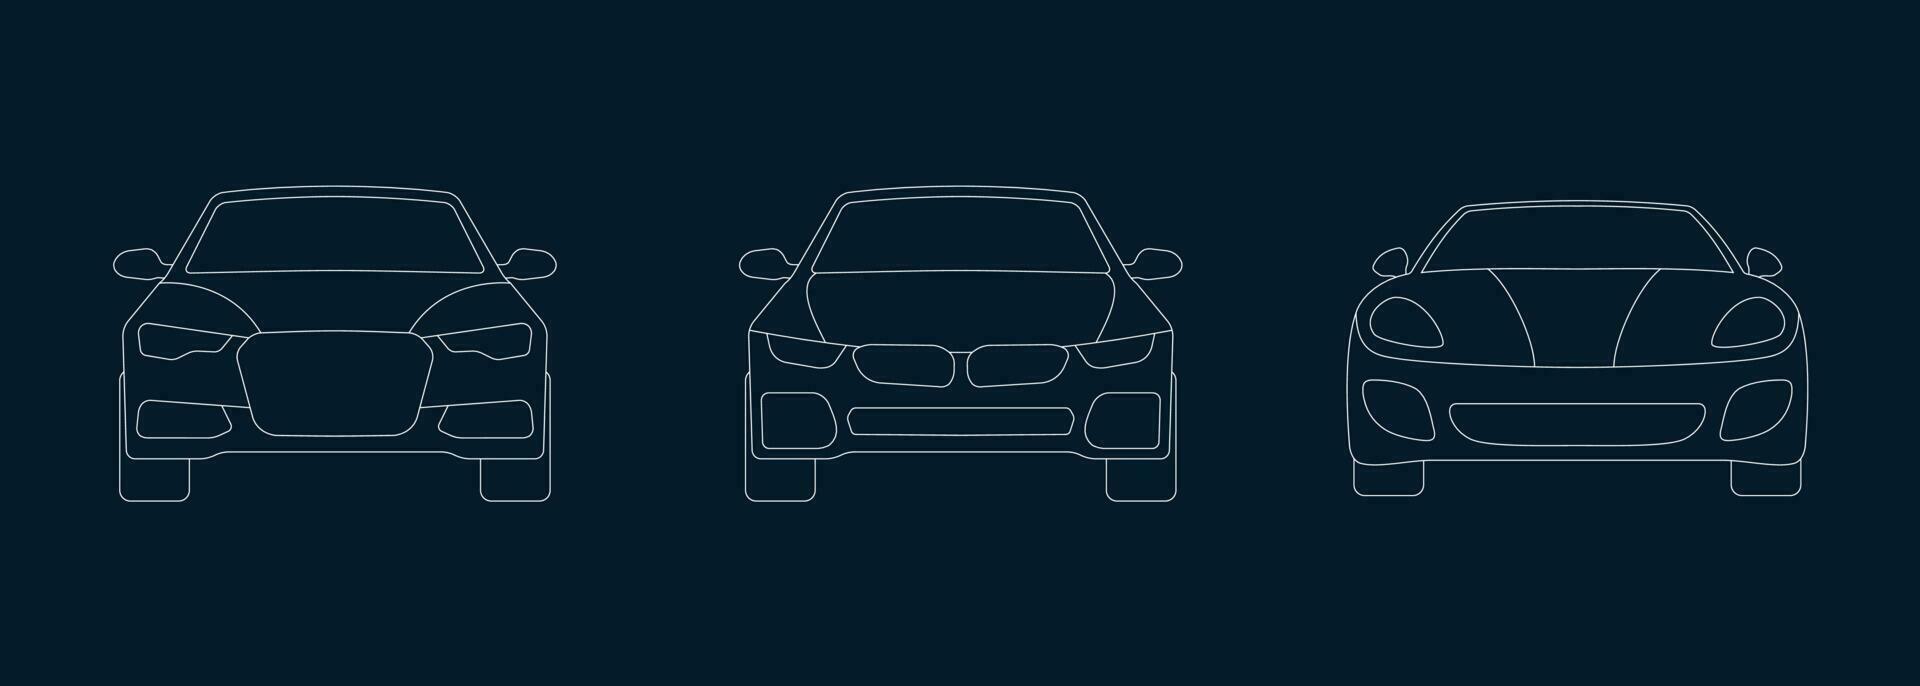 Car front view icon and illustration line style vector